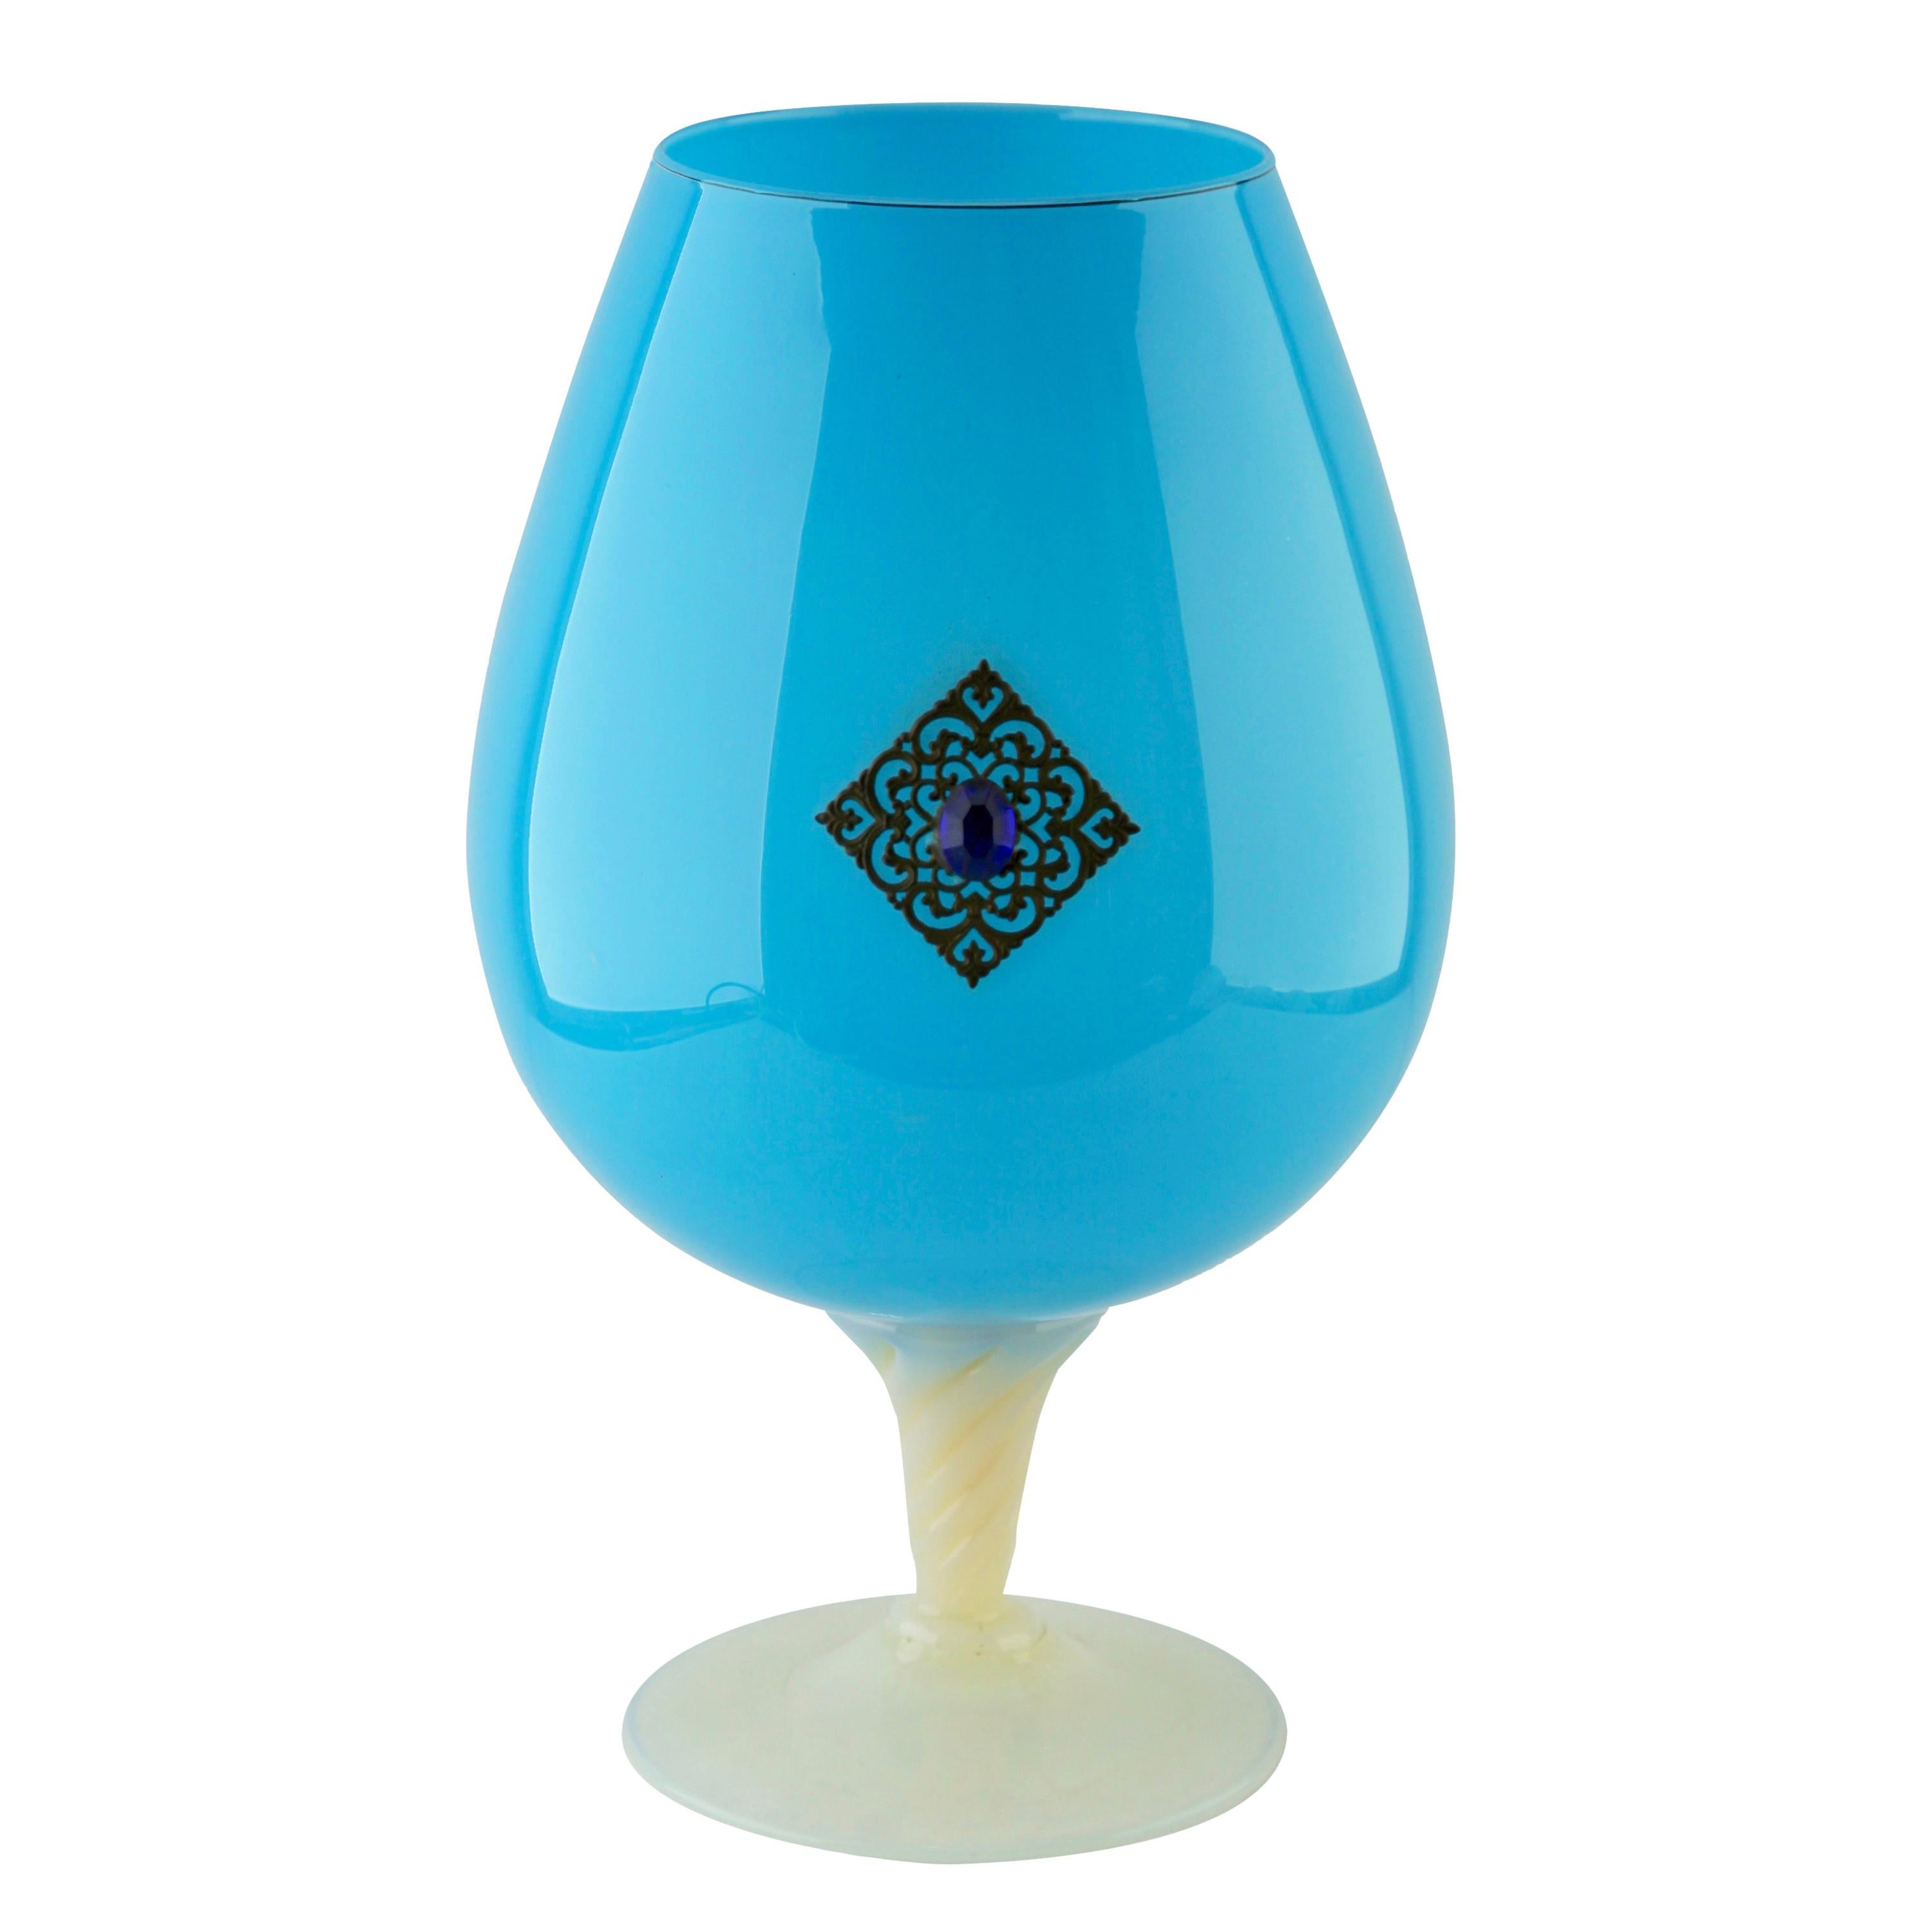 Empoli 'Florence, Italy' Cognac Glass in Turquoise in Opaline, 1970s